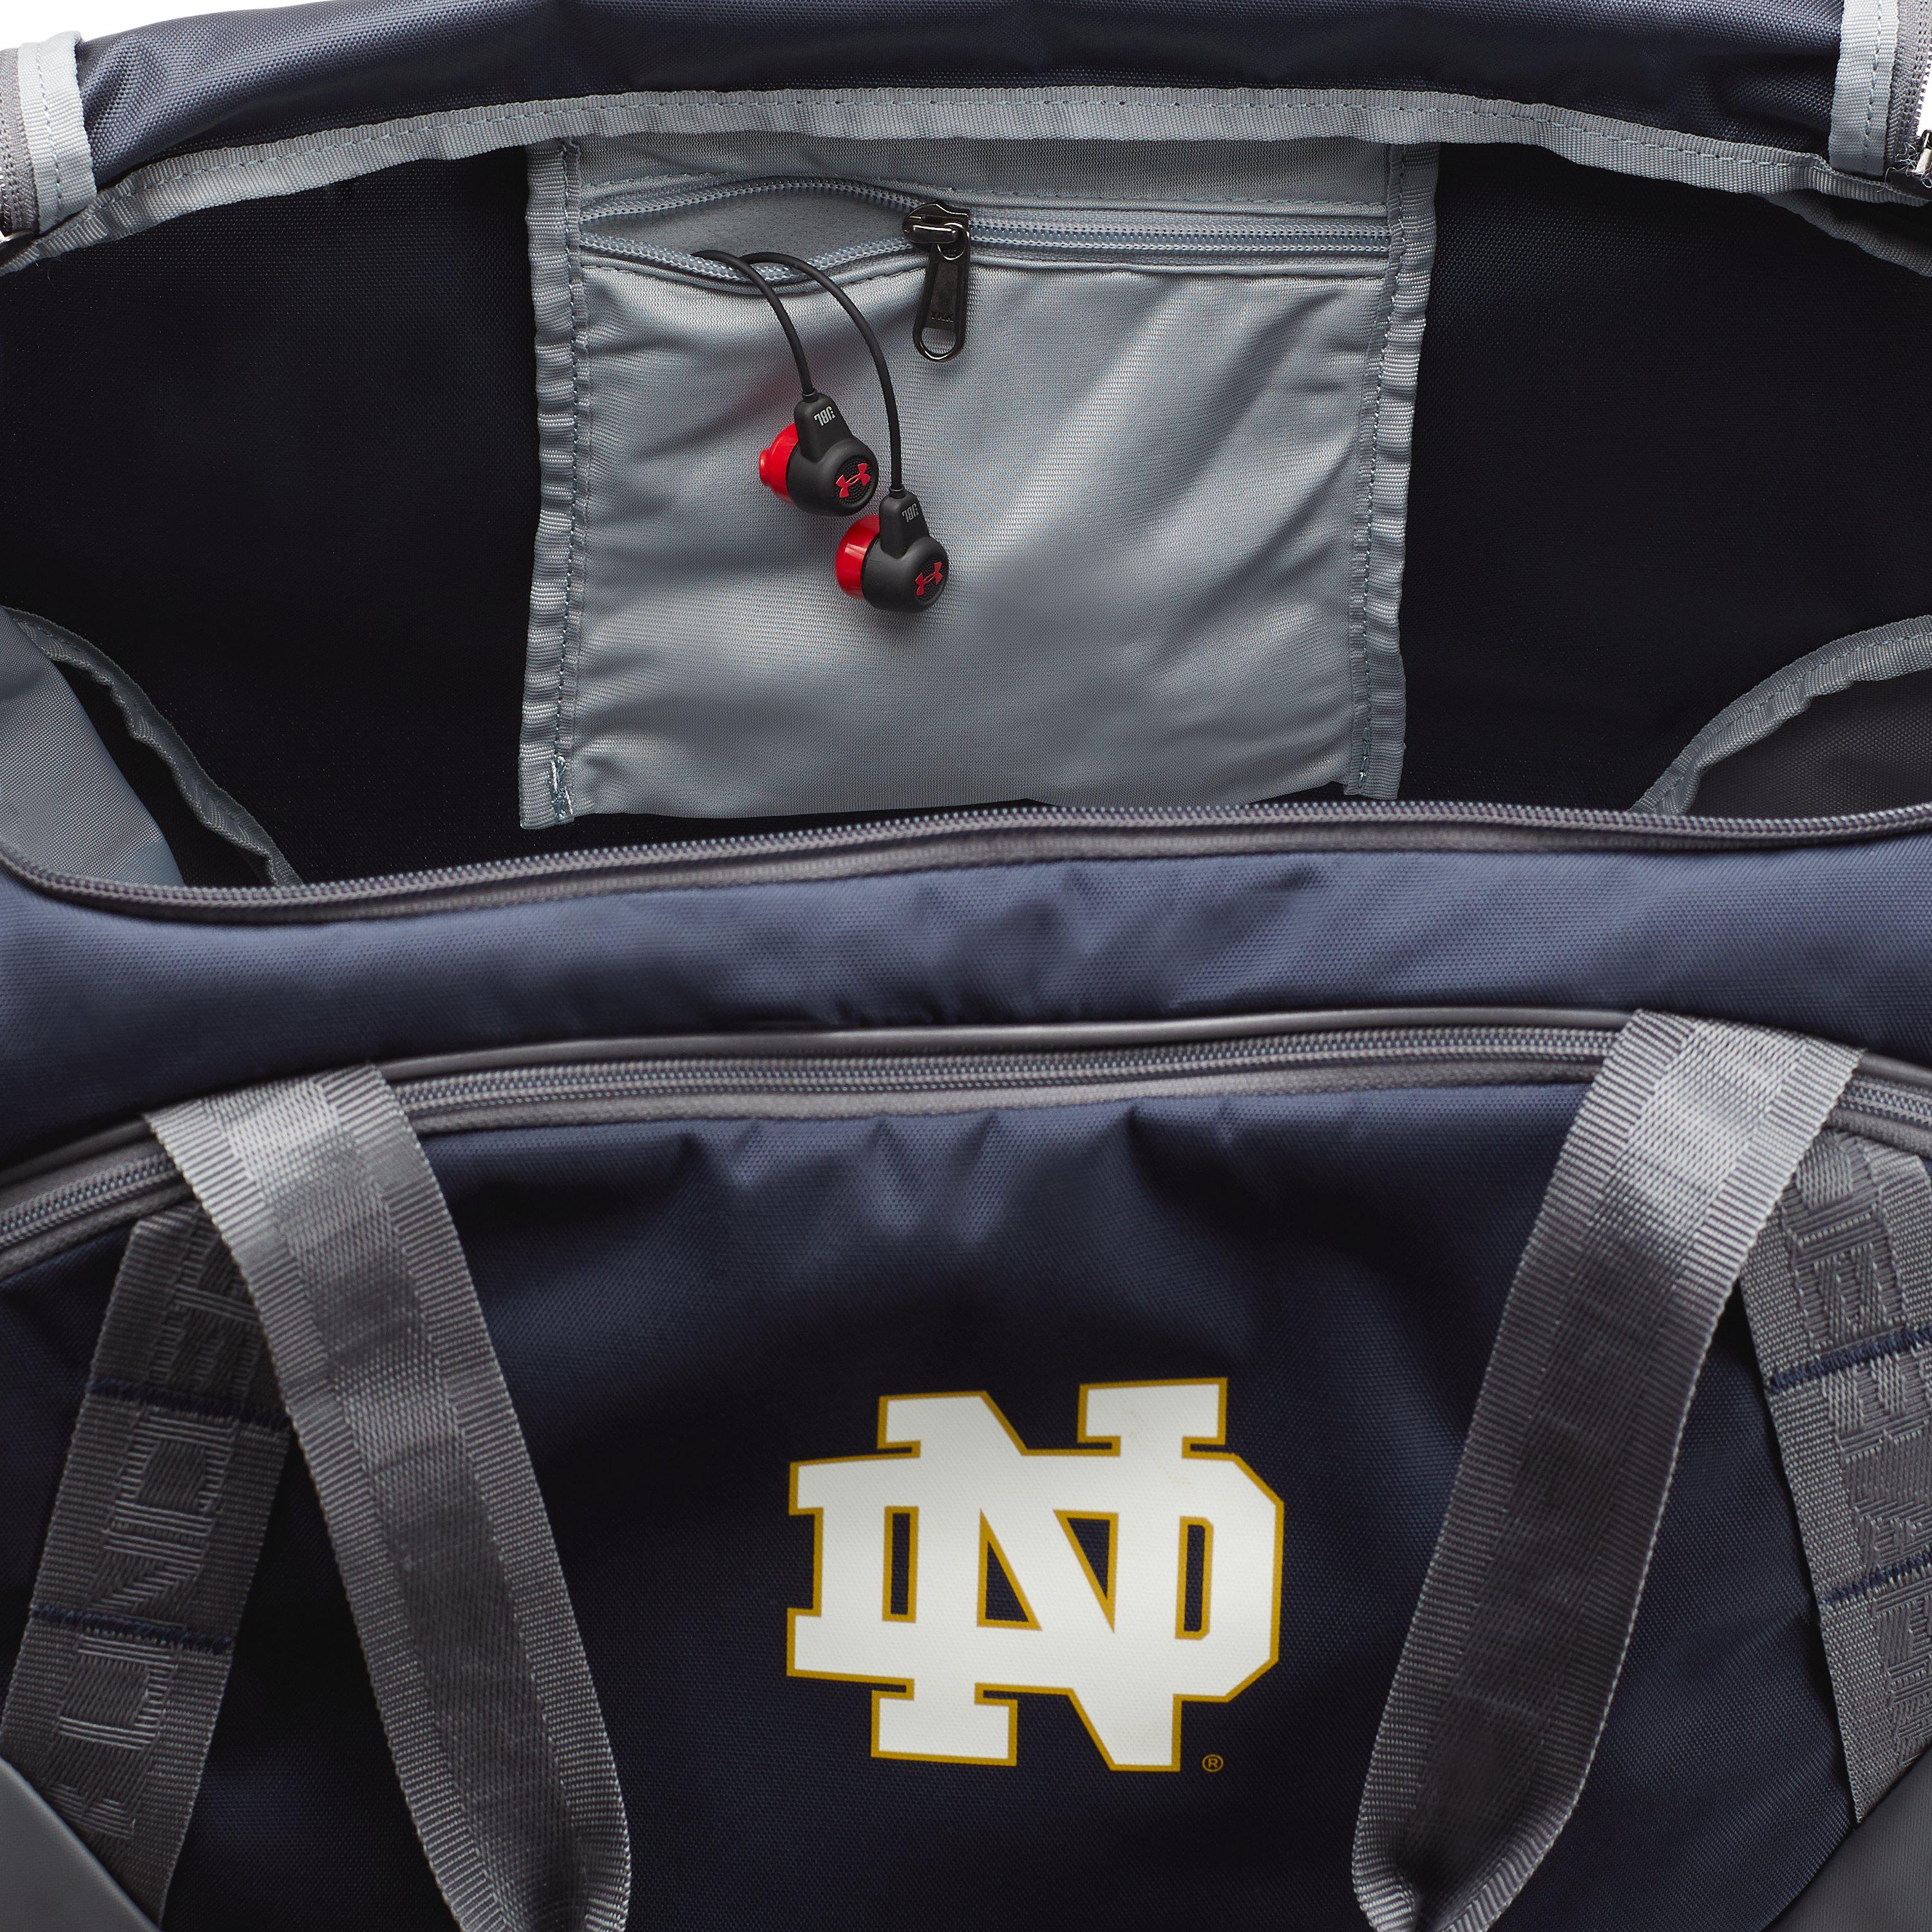 Under Armour Notre Dame Ua Undeniable 3.0 Medium Duffle Bag in Midnight  Navy/ (Blue) for Men - Lyst